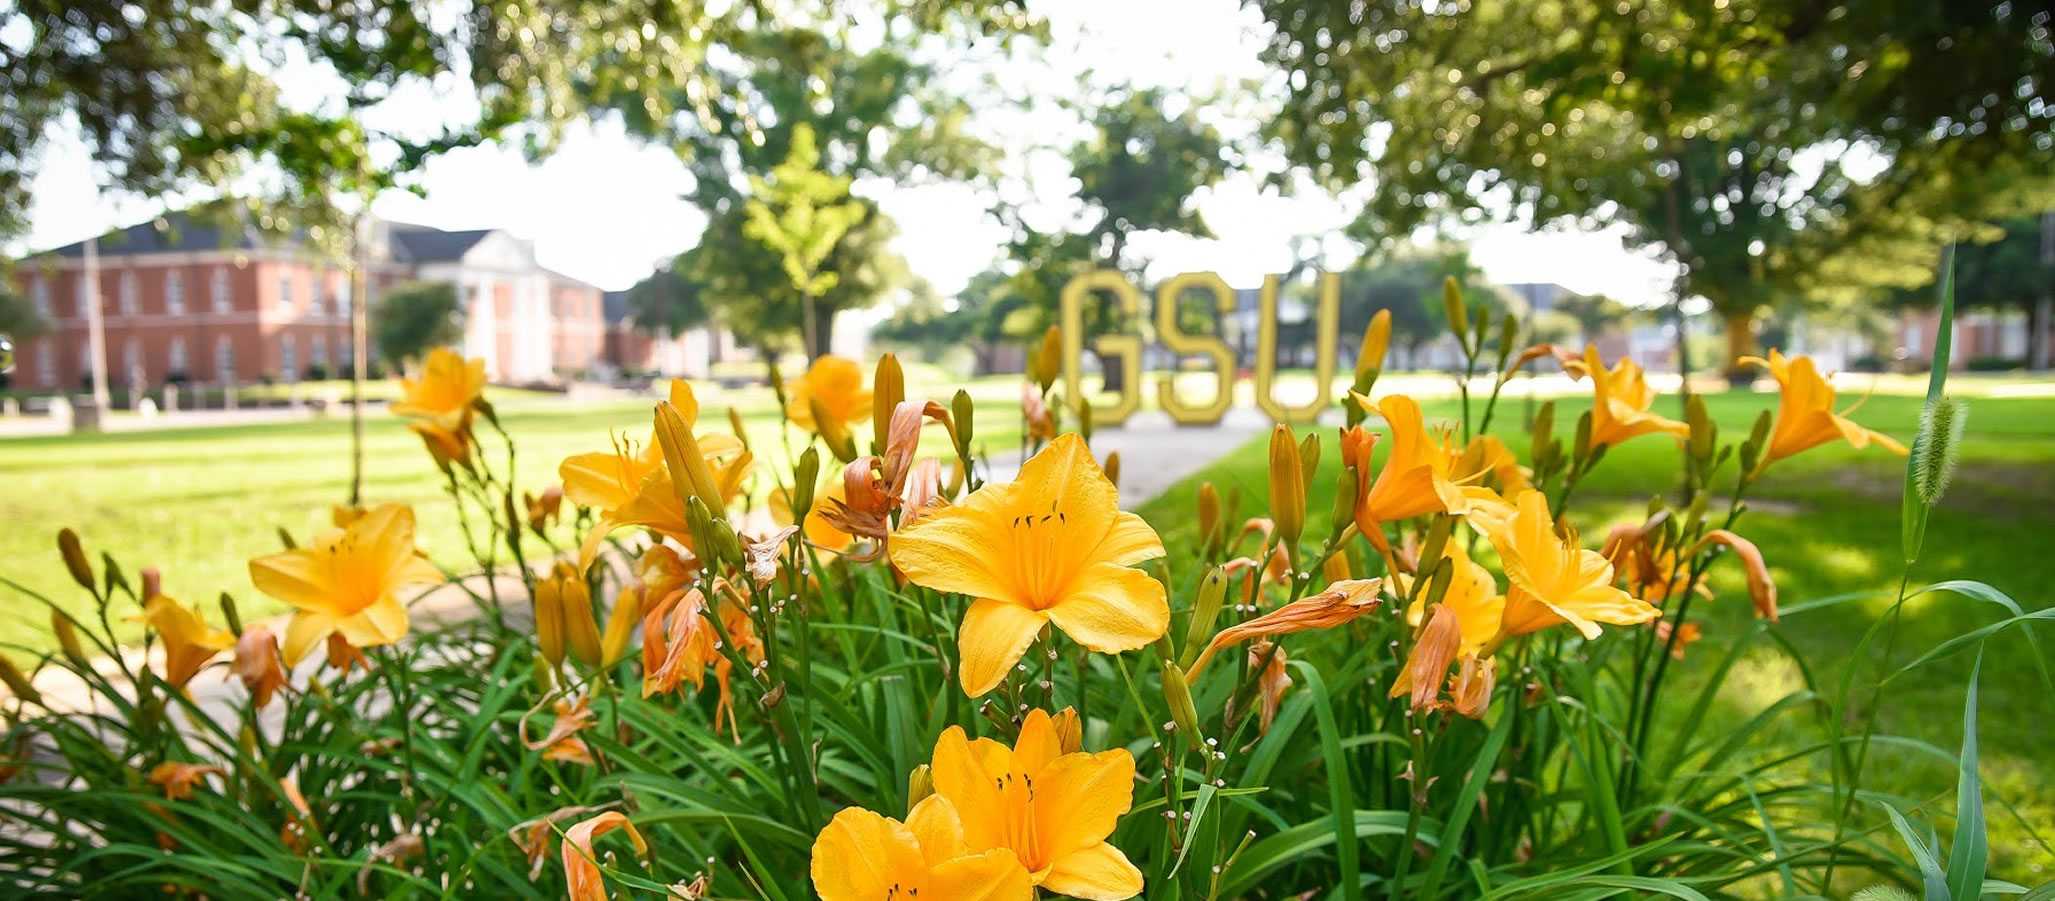 Campus Flowers in Quad in front of Long Jones Hall with GSU sign background